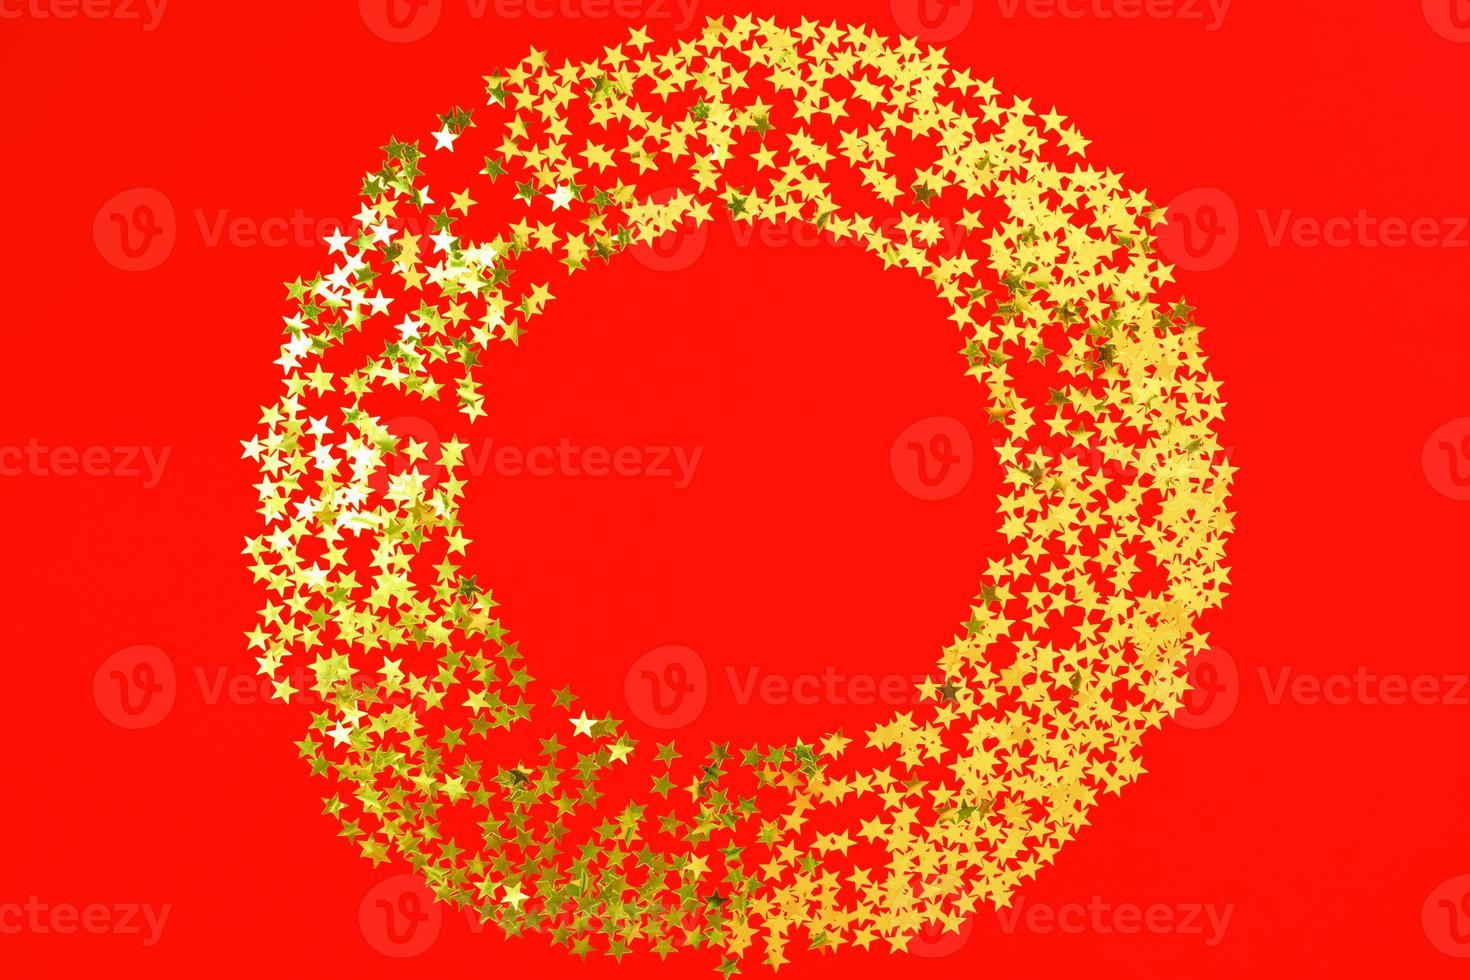 Red backdrop with glitter and golden stars confetti in circle. Festive holiday bright background photo